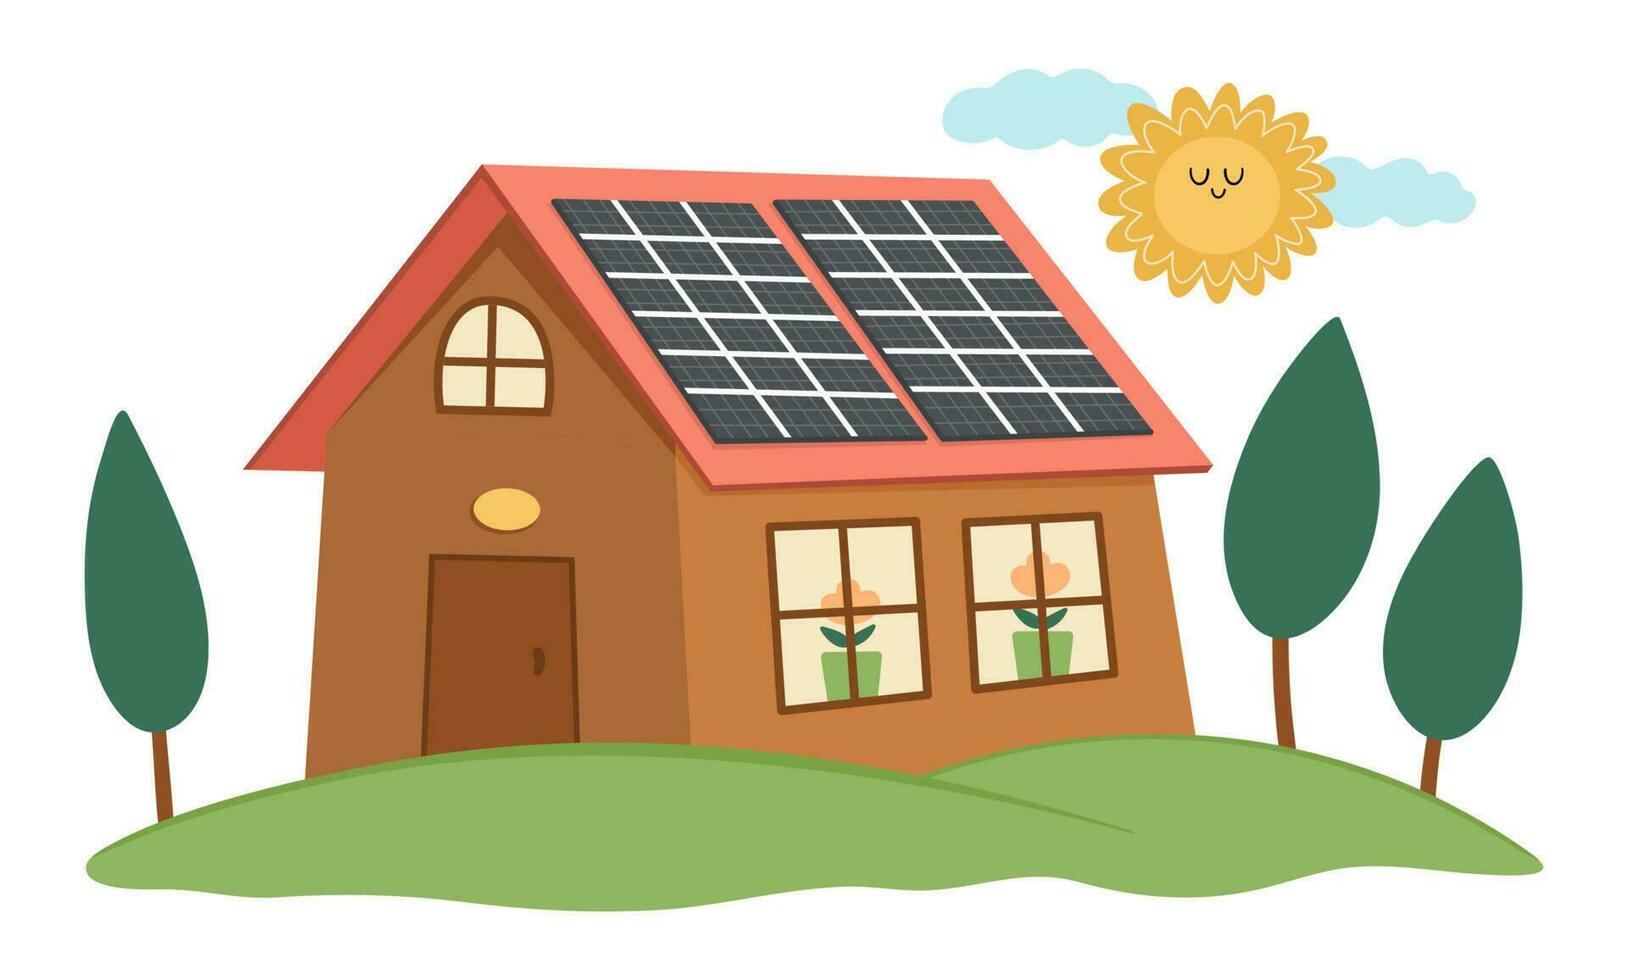 Vector eco house icon. Environment friendly home concept with trees, and solar panels. Ecological country lifestyle illustration. Cute earth day landscape or scene